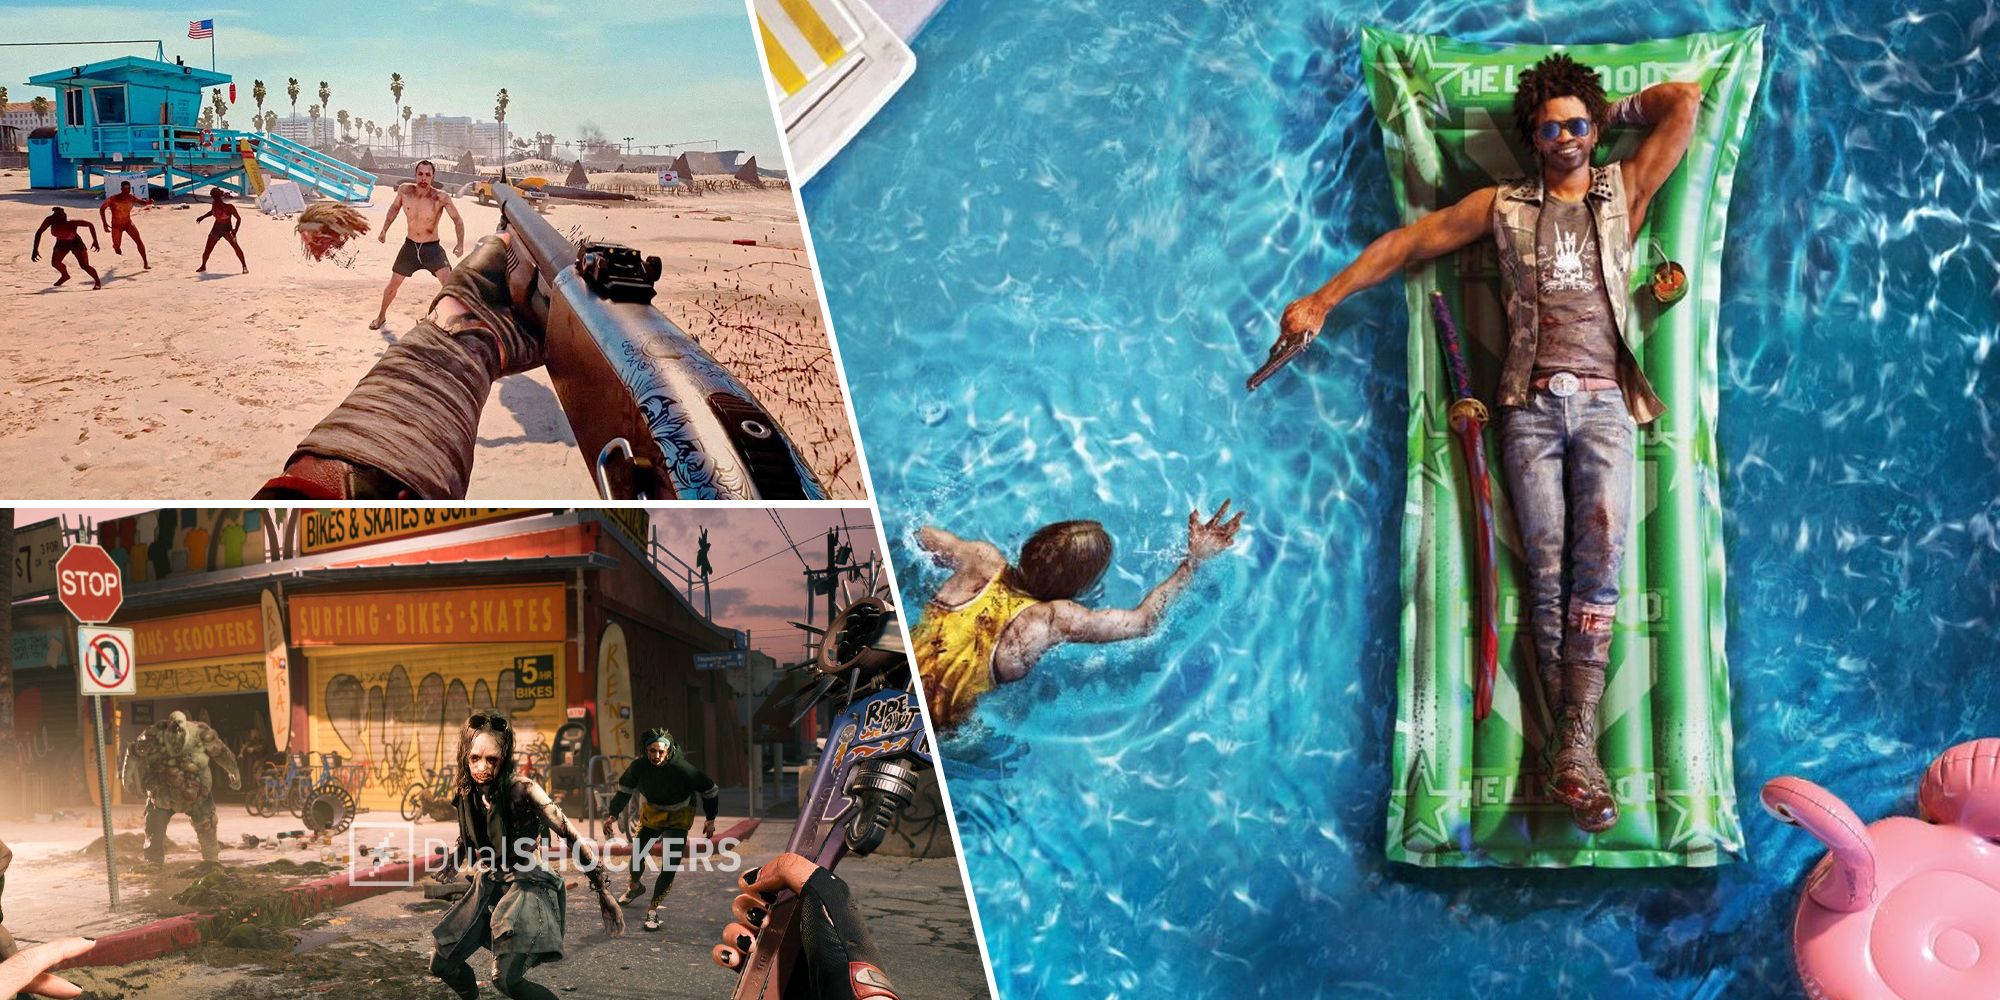 Review: Dead Island